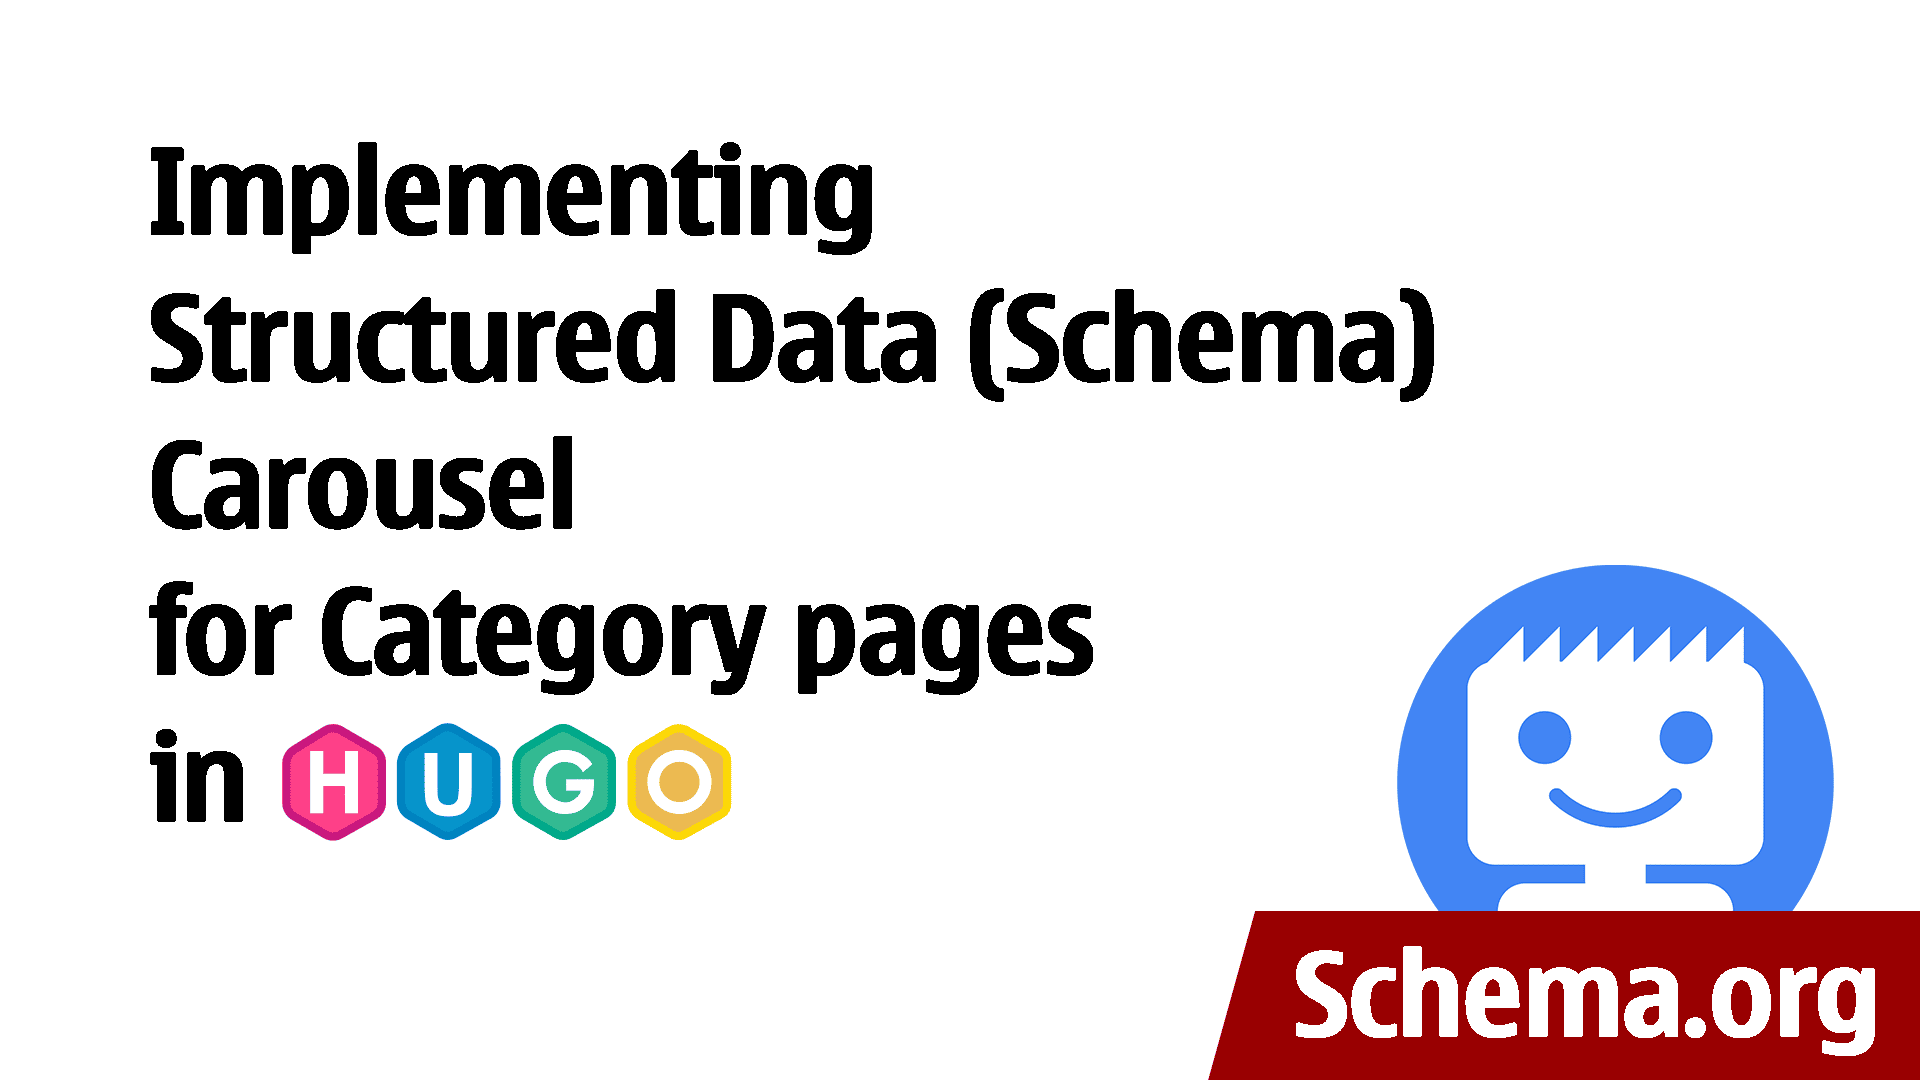 Implementing Structured Data (Schema) Carousel for Category pages in Hugo